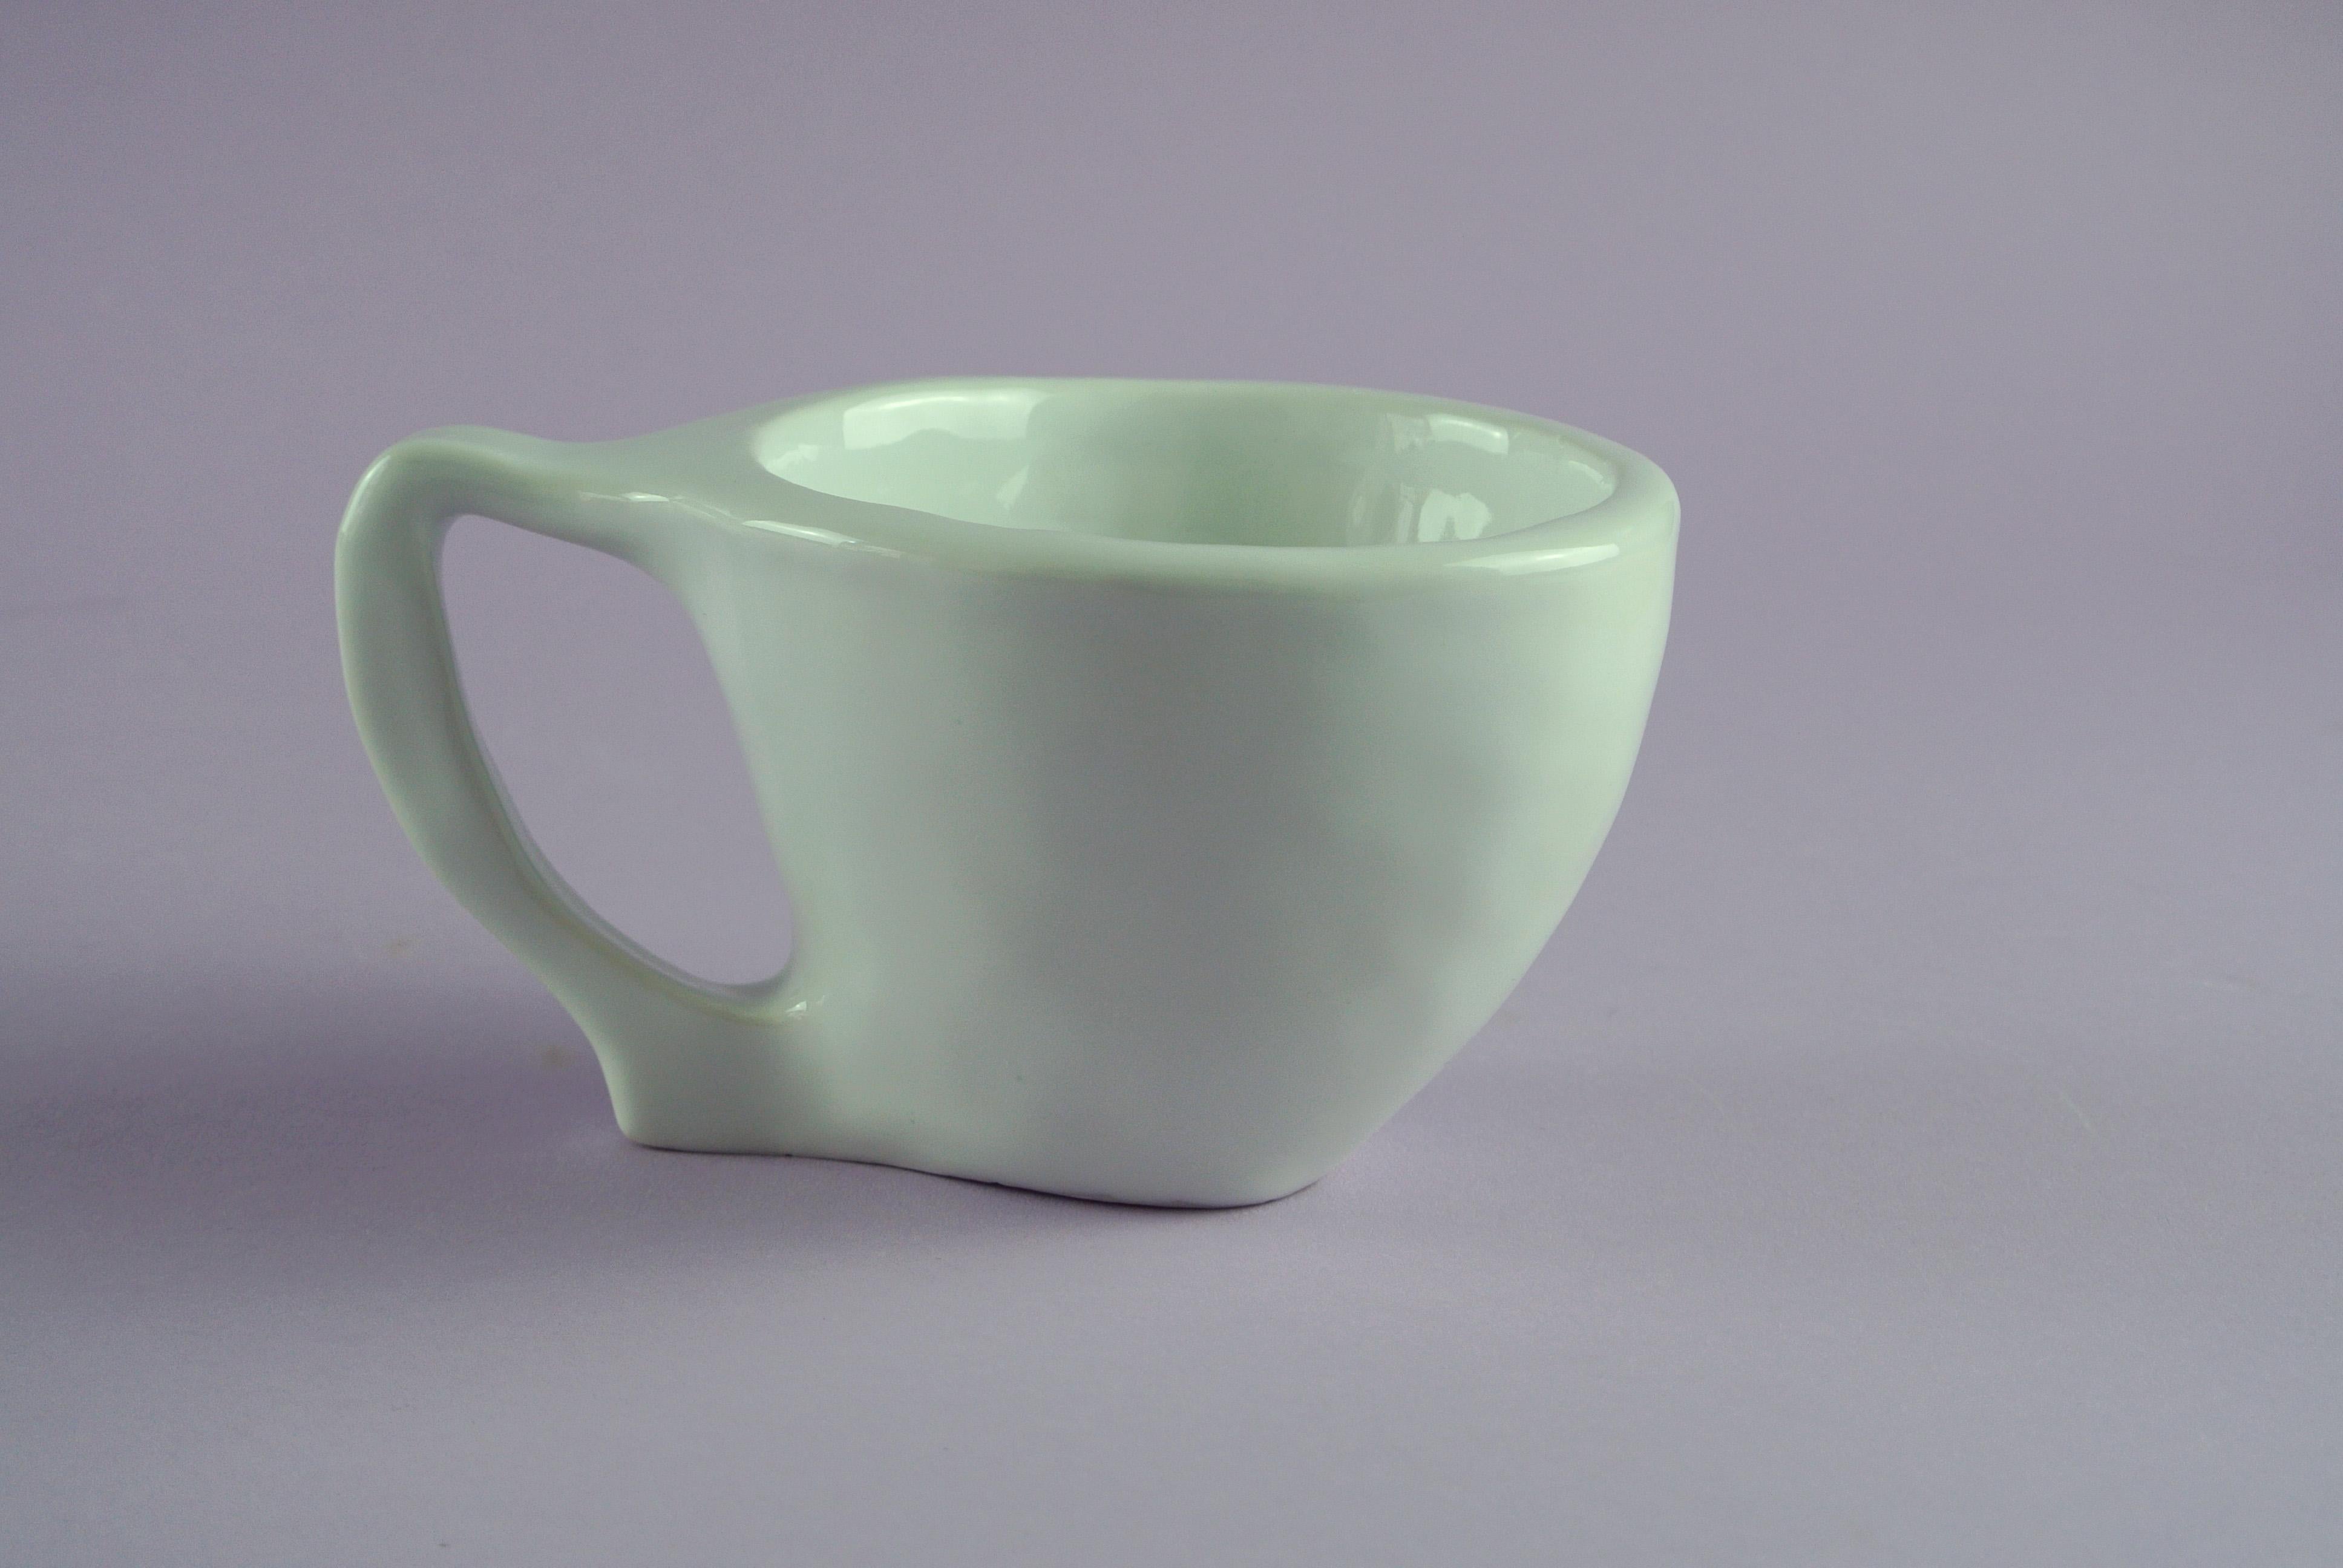 Hand-Crafted Hand Carved Porcelain Cup and Tray with White Glossy Glaze